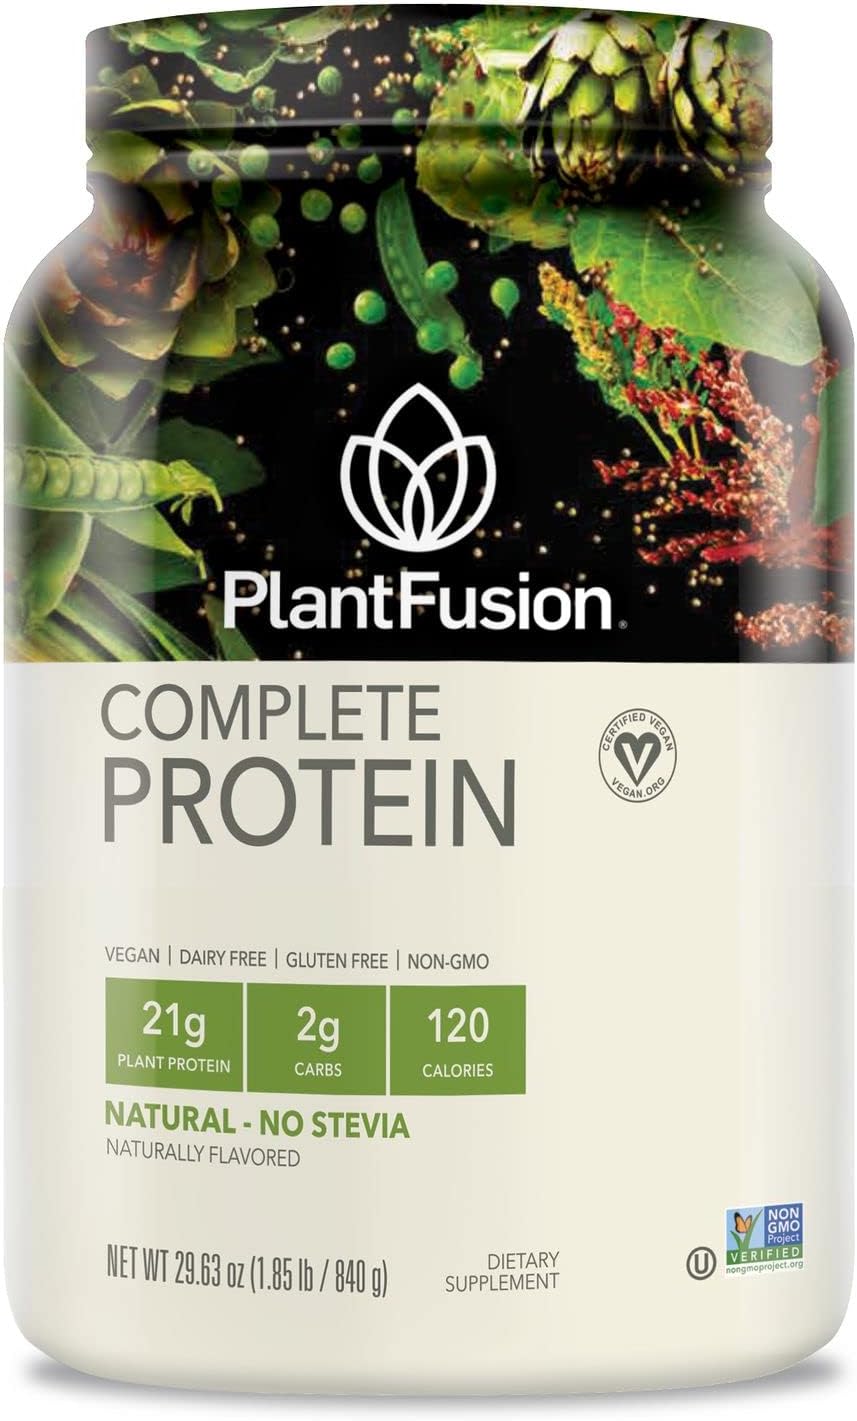 PlantFusion Complete Vegan Protein Powder - Plant Based Protein Powder With BCAAs, Digestive Enzymes and Pea Protein - Keto, Gluten Free, Non-Dairy, No Sugar, Non-GMO - Natural-No Stevia 1.85 lb